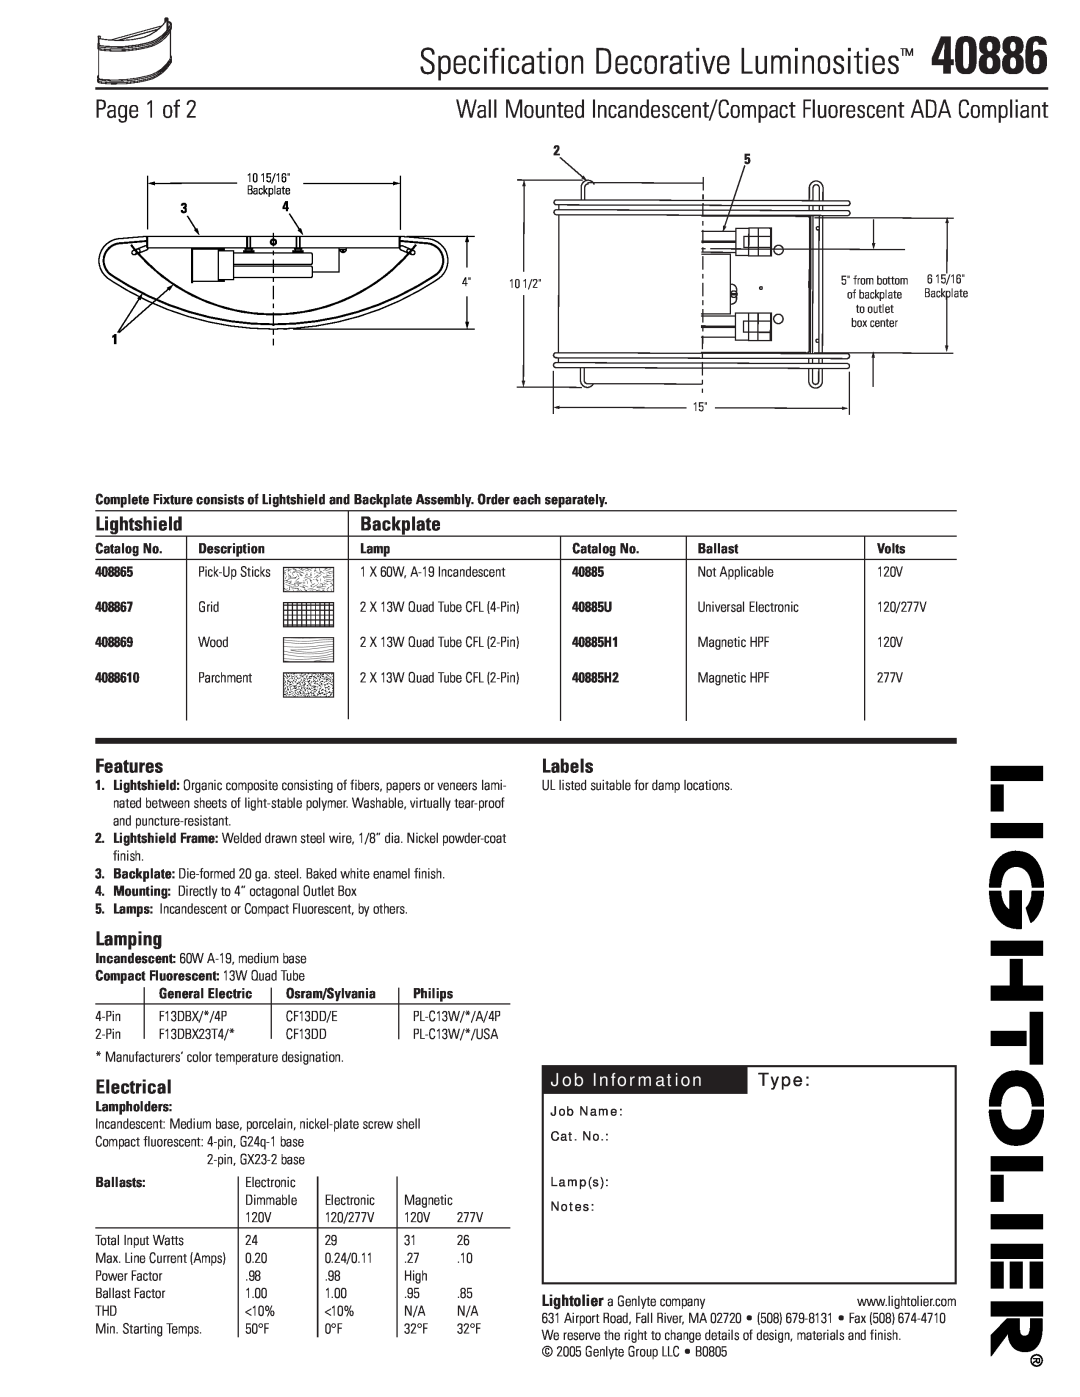 Lightolier 40886 manual Specification Decorative Luminosities, Page 1 of, Backplate, Features, Labels, Lamping, Electrical 